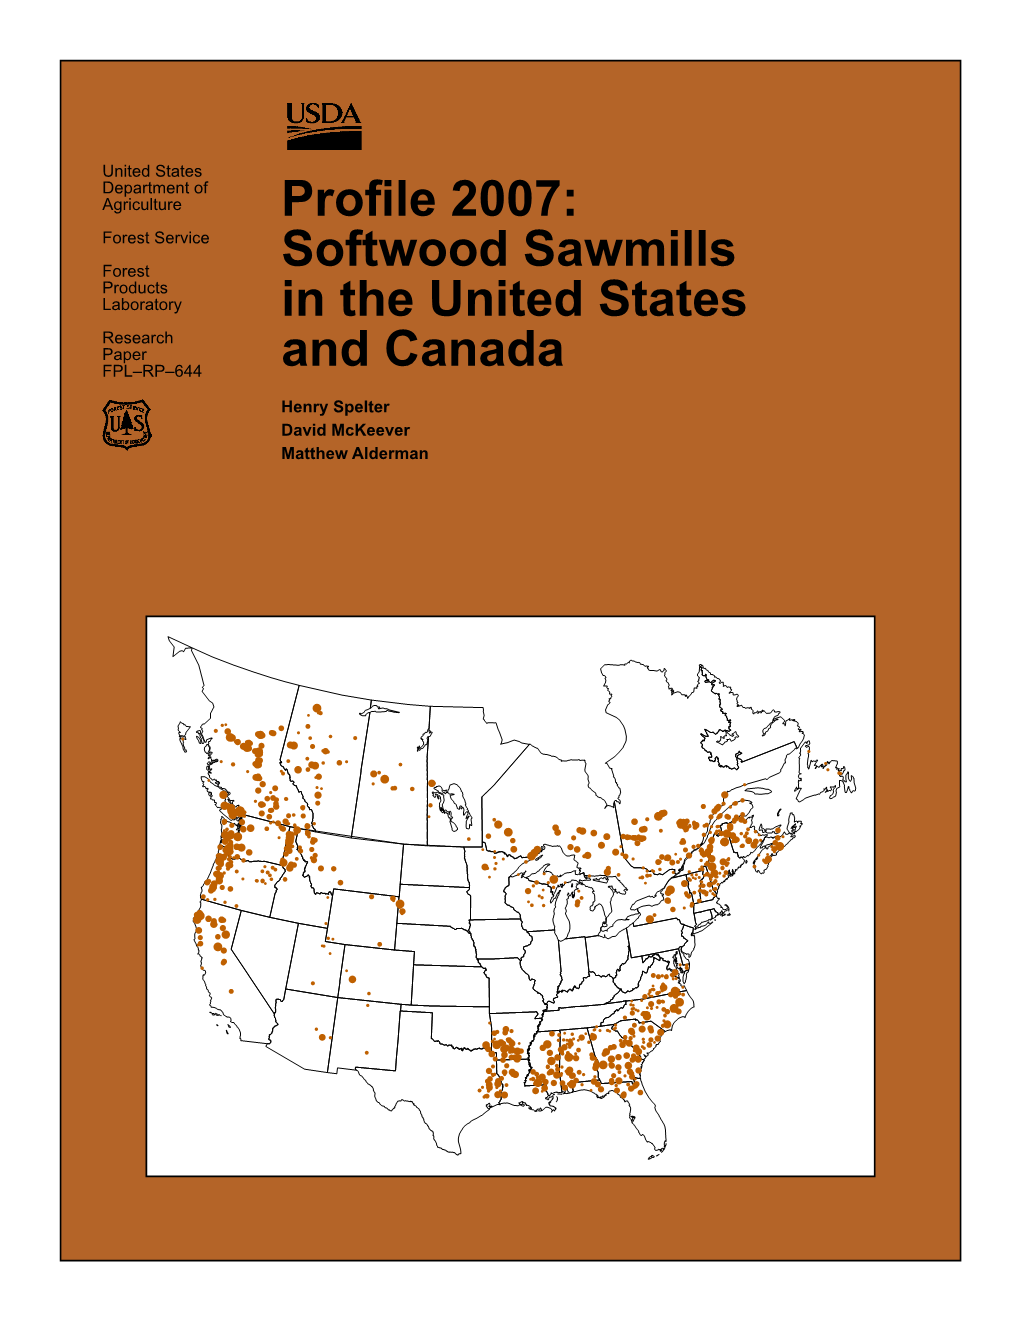 Softwood Sawmills in the United States and Canada